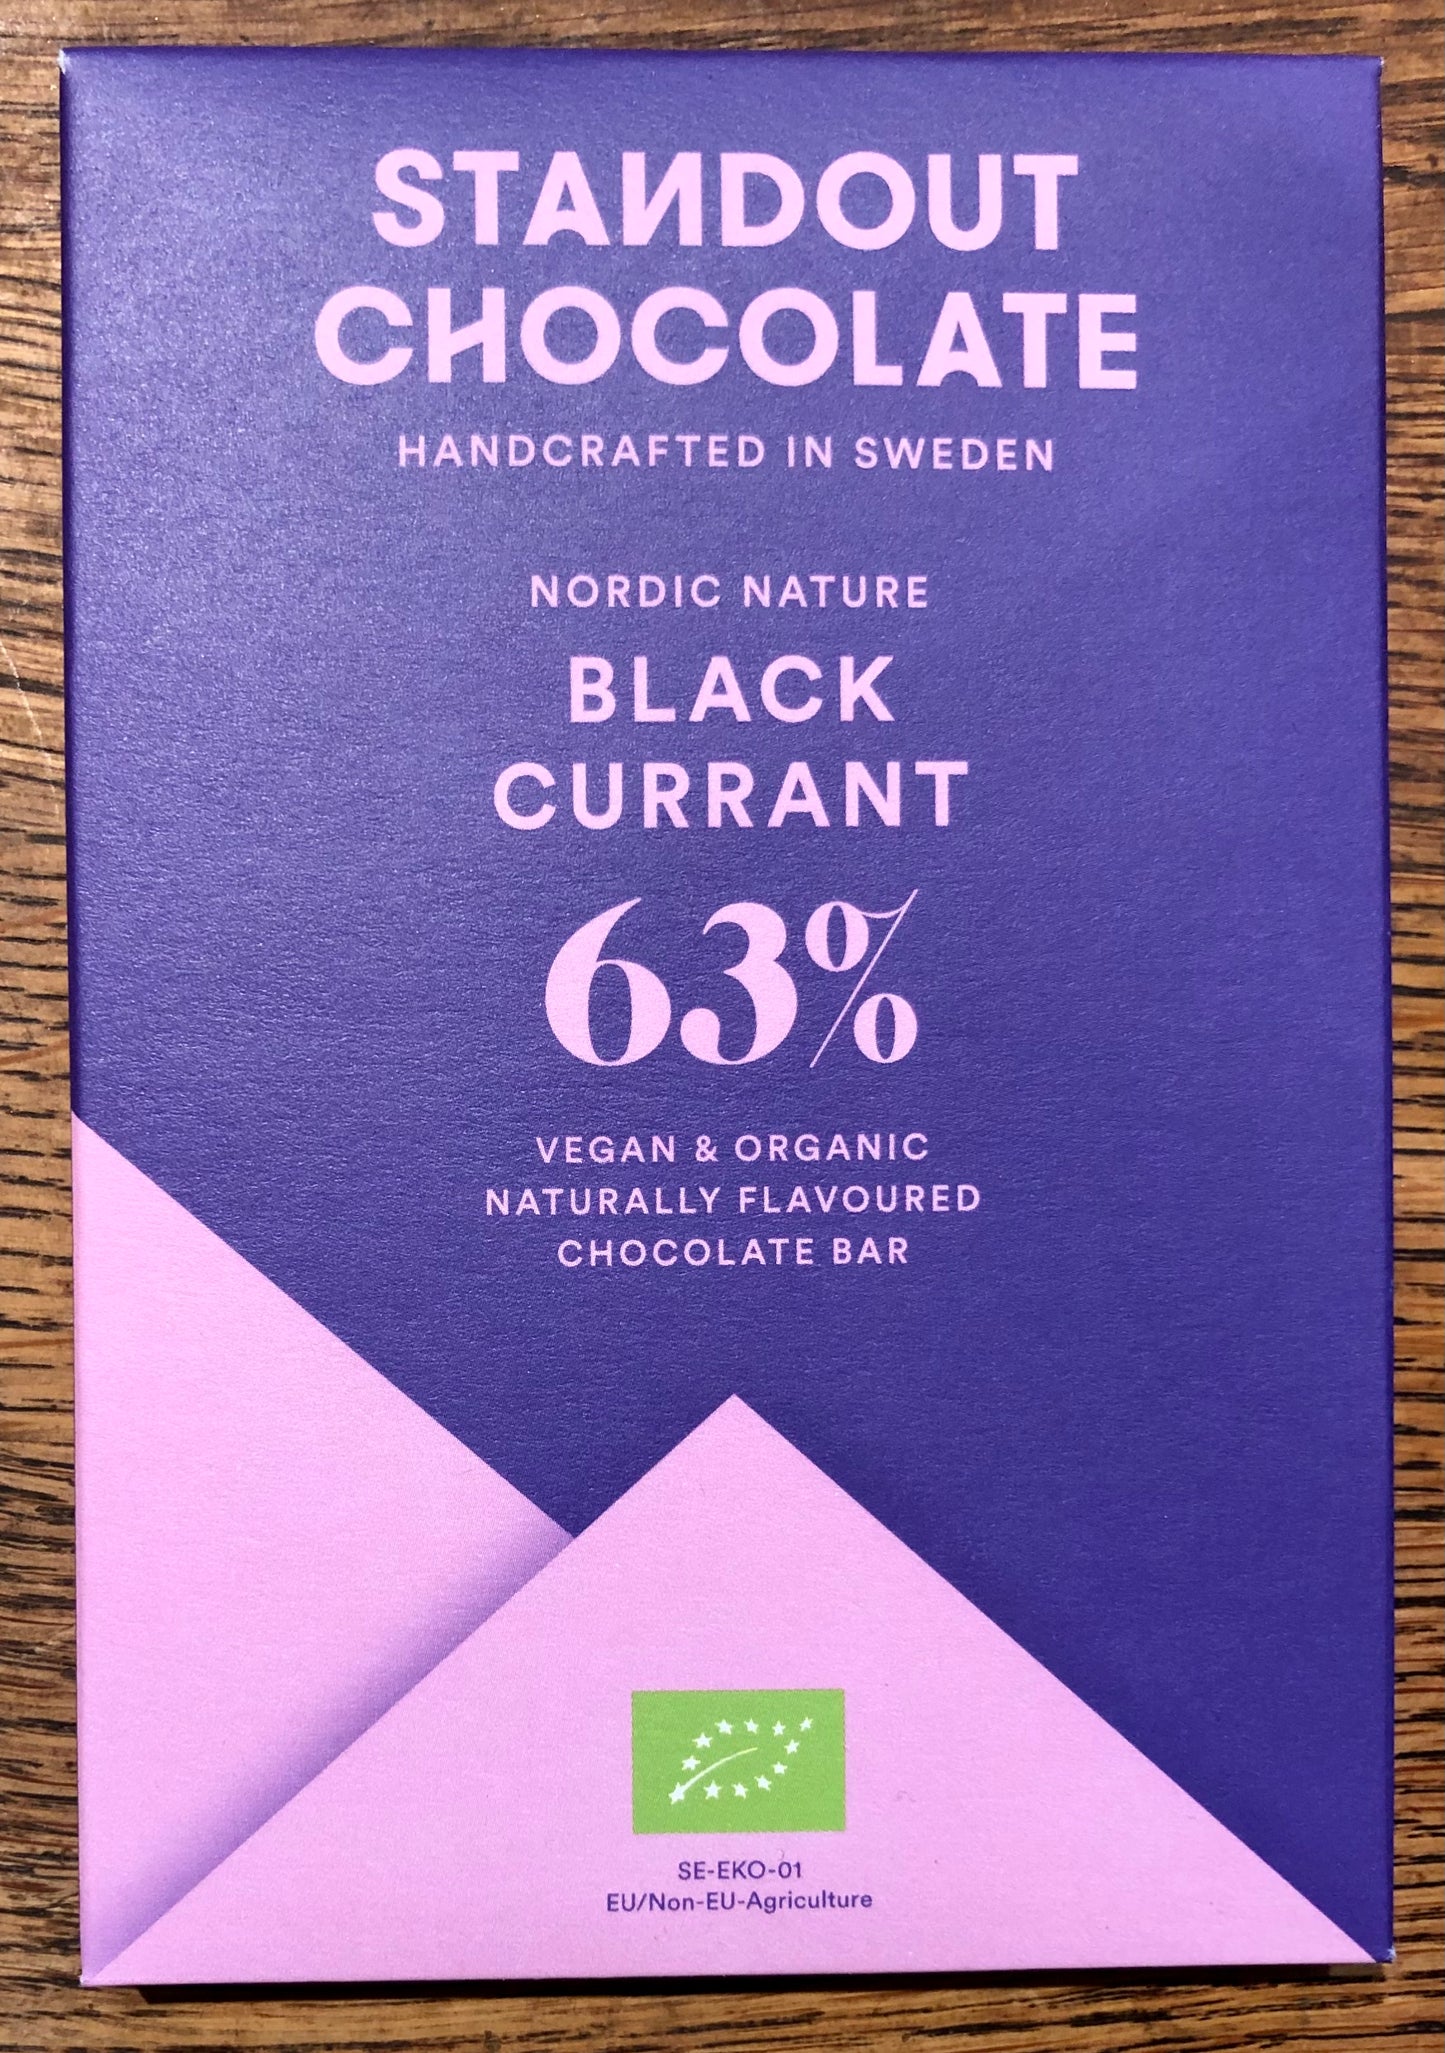 Standout Chocolate Black currant